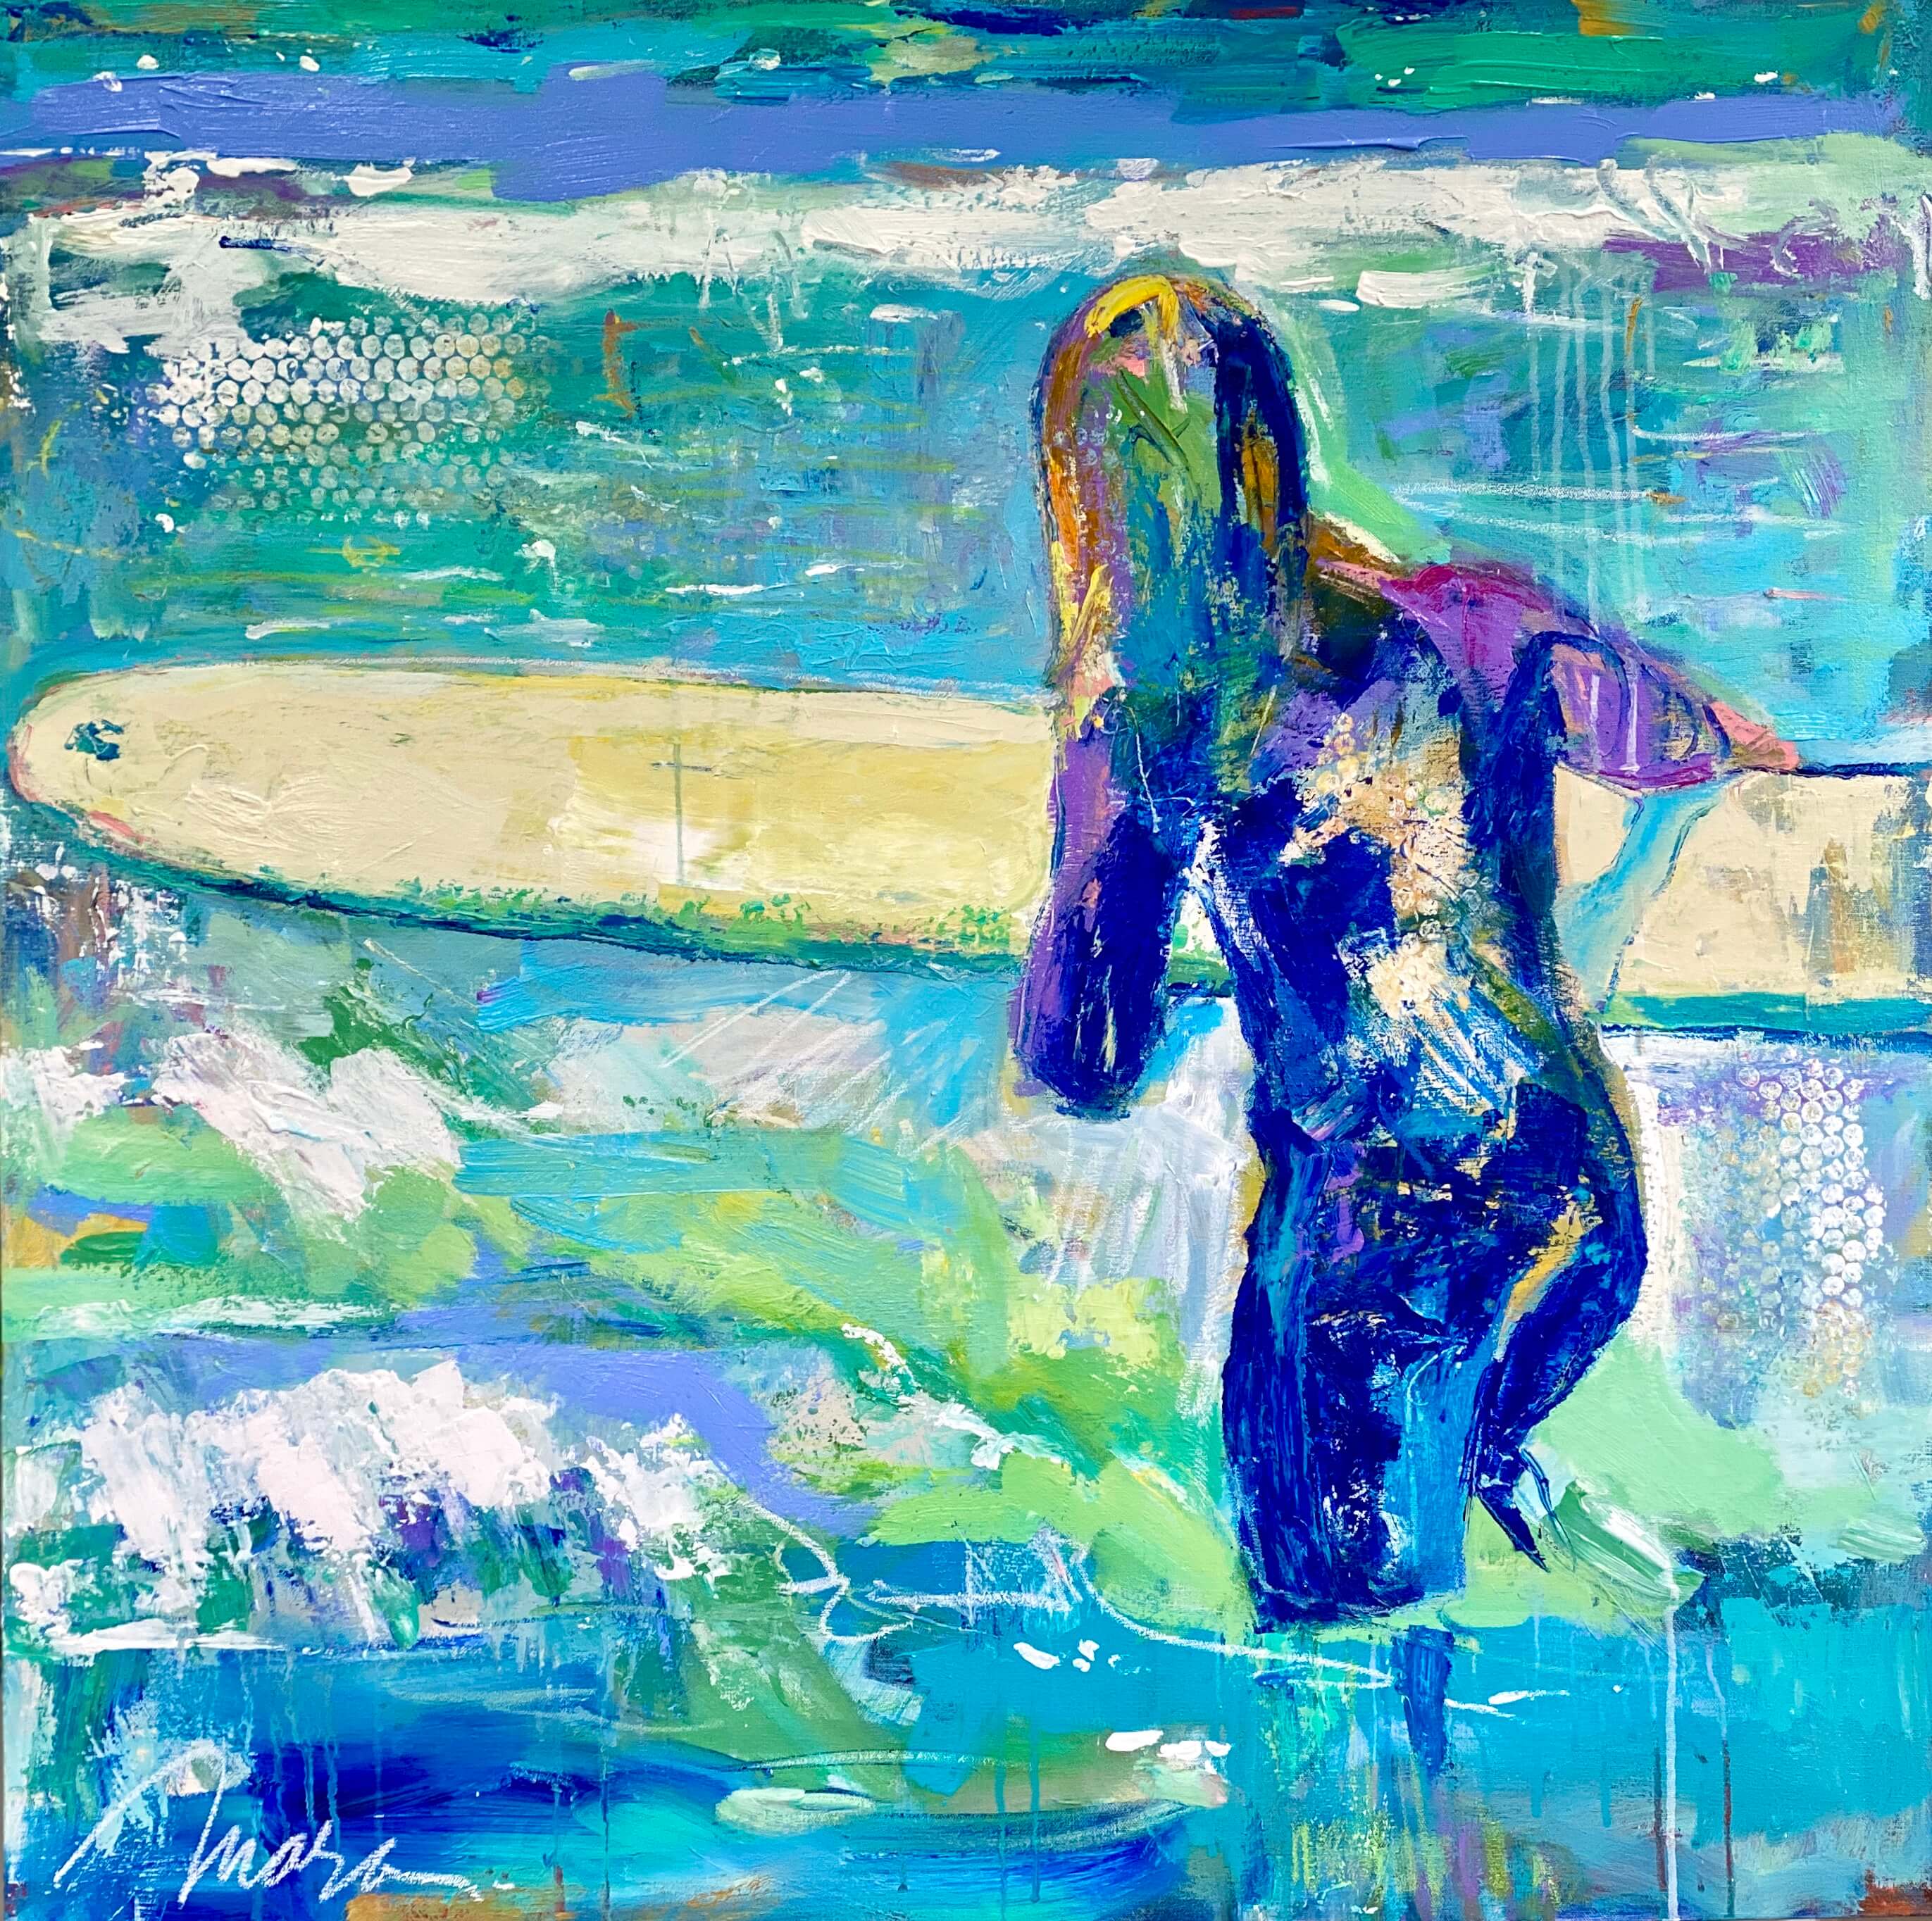 Lynn Mara's "Surfer Girl" (private collection, acrylic and oil pastel on canvas, 36" x 36")